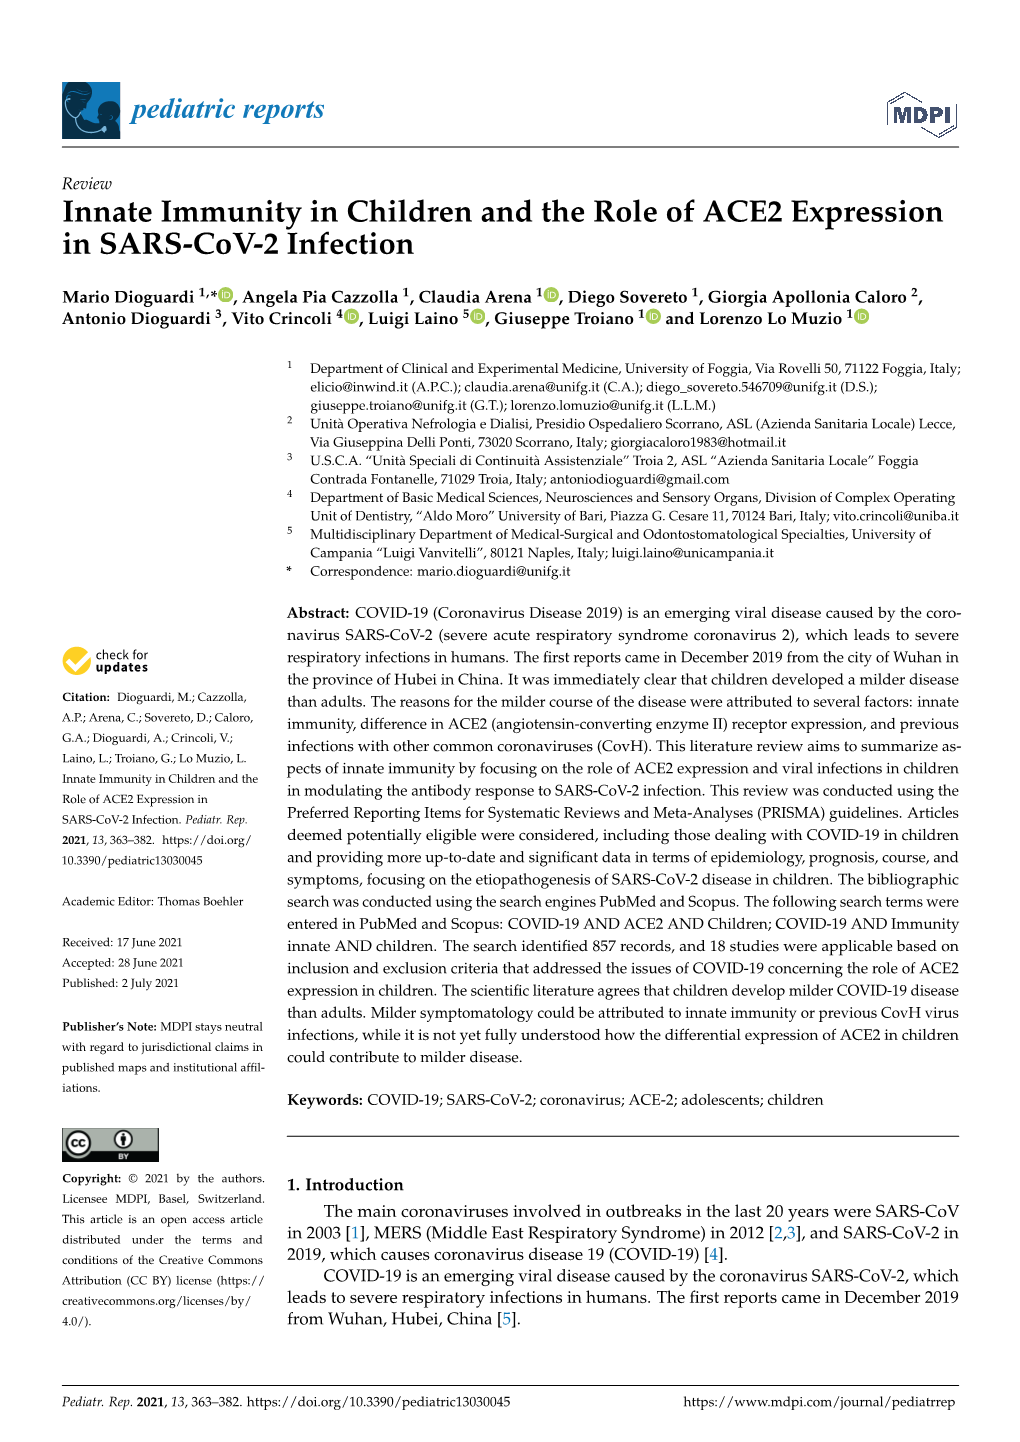 Innate Immunity in Children and the Role of ACE2 Expression in SARS-Cov-2 Infection